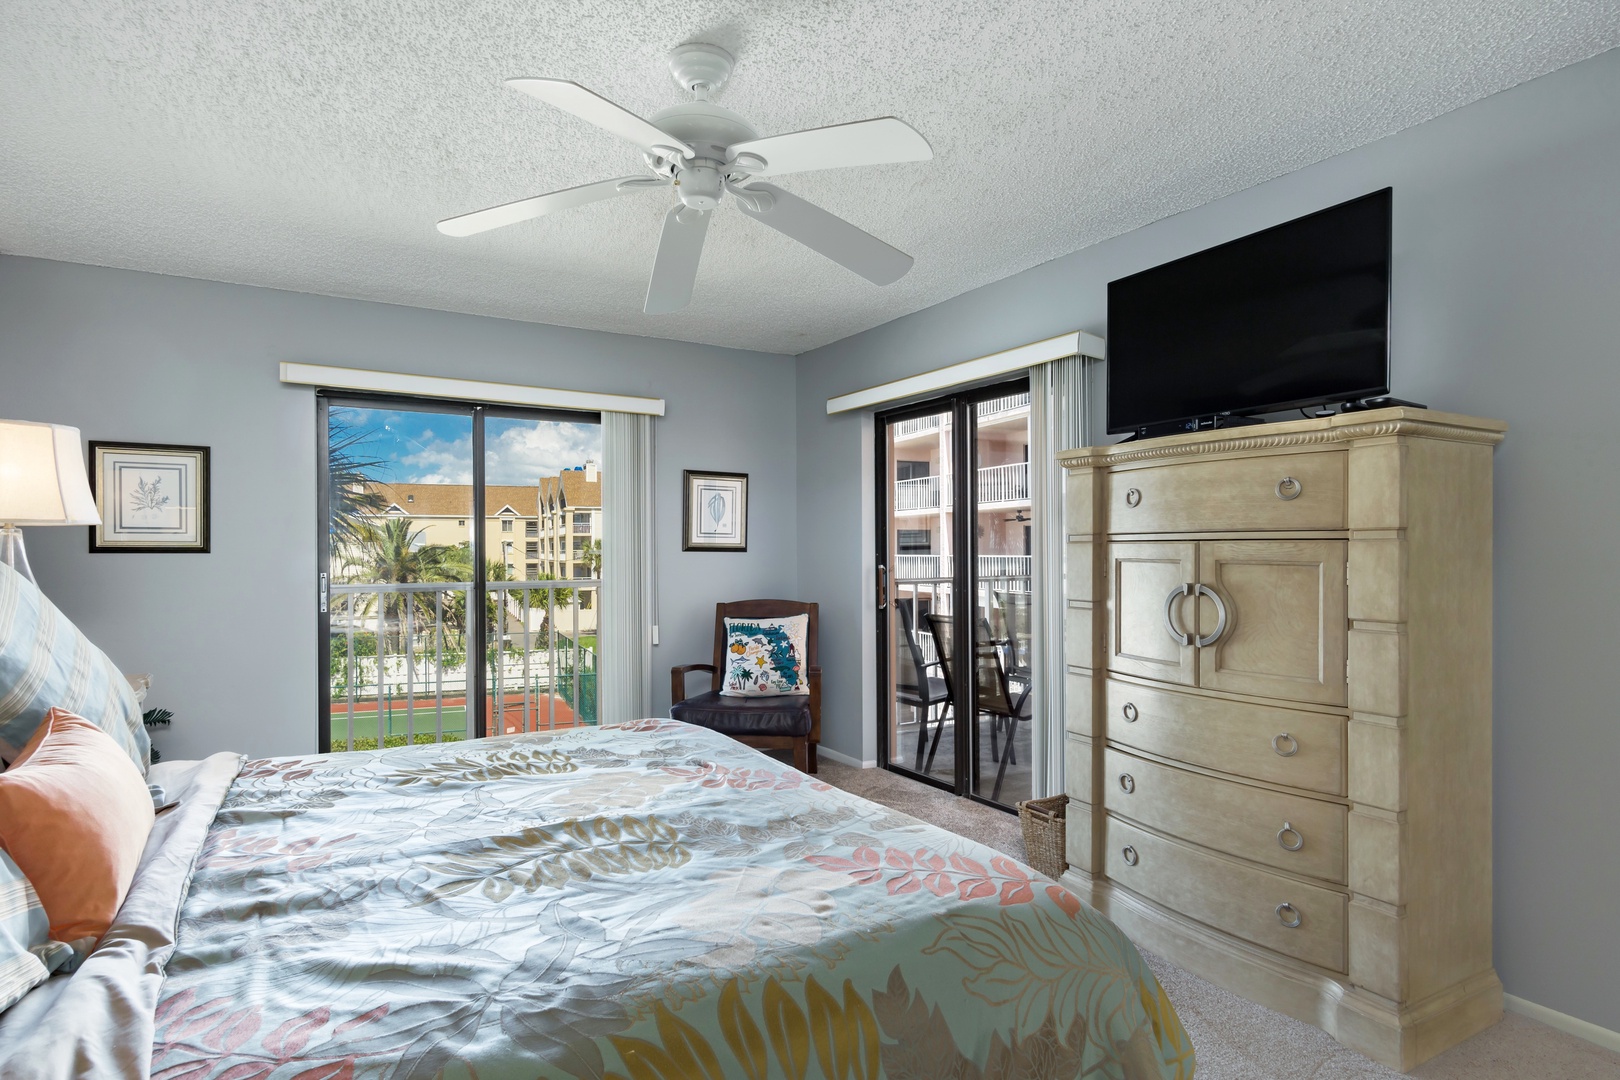 There's access to the balcony and a TV in the Master Bedroom.